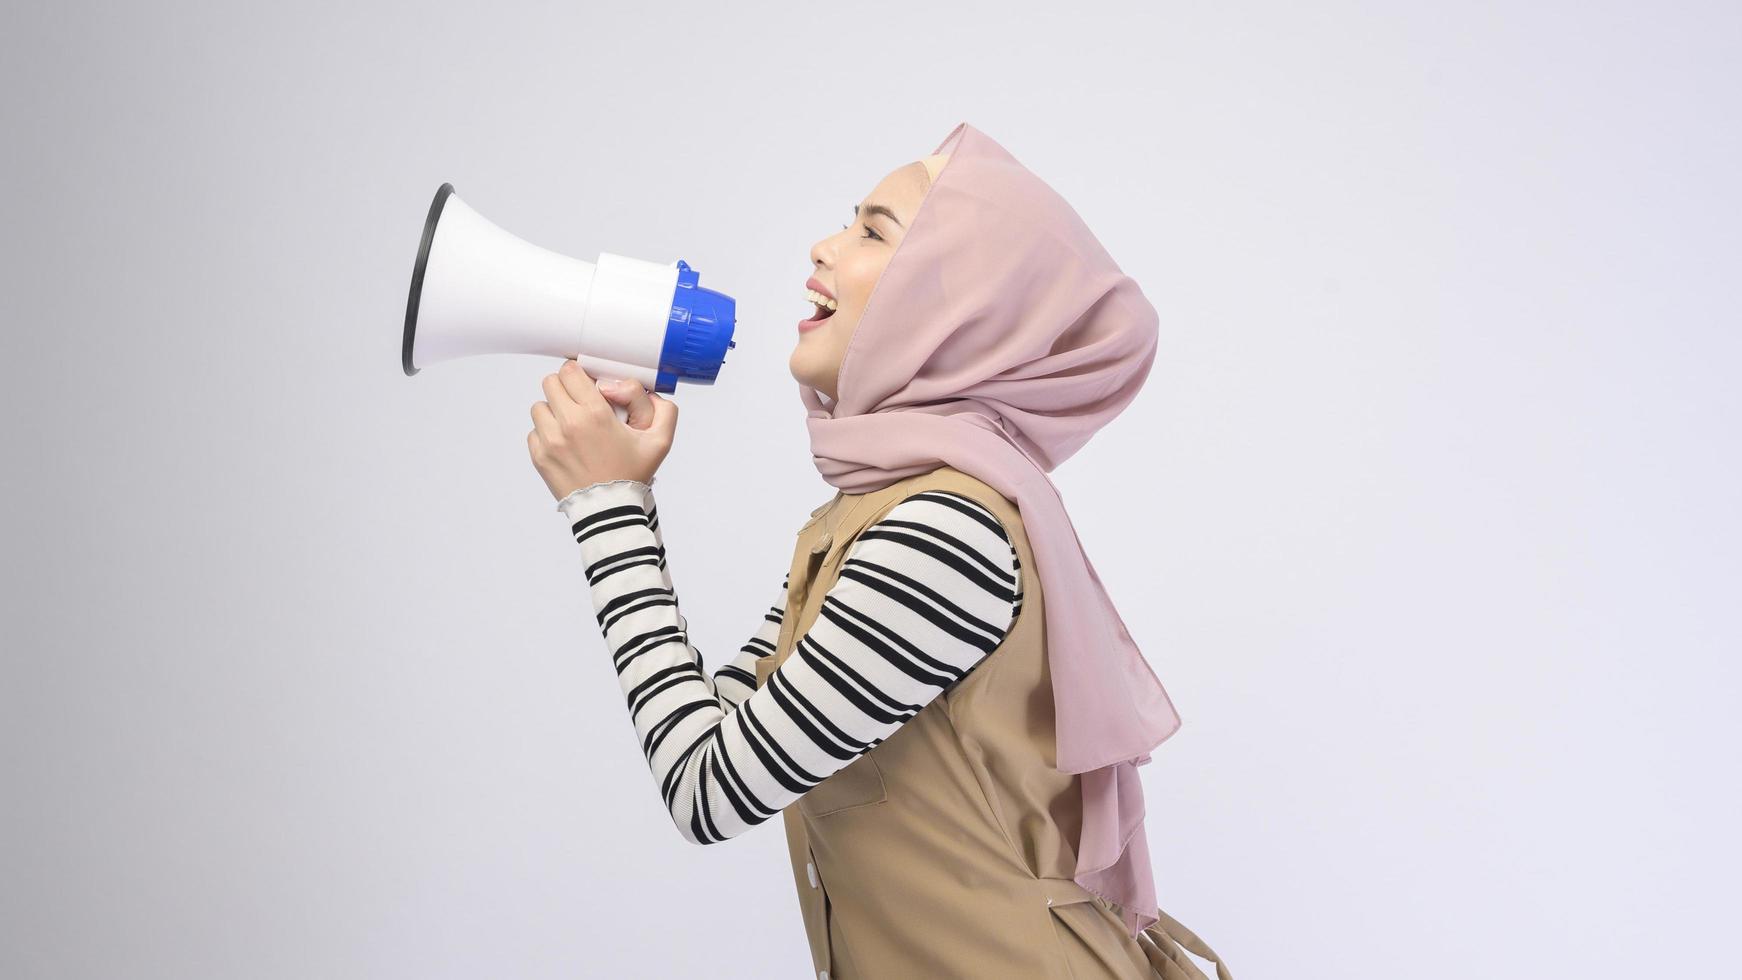 Happy muslim woman is announcing with megaphone on white background photo